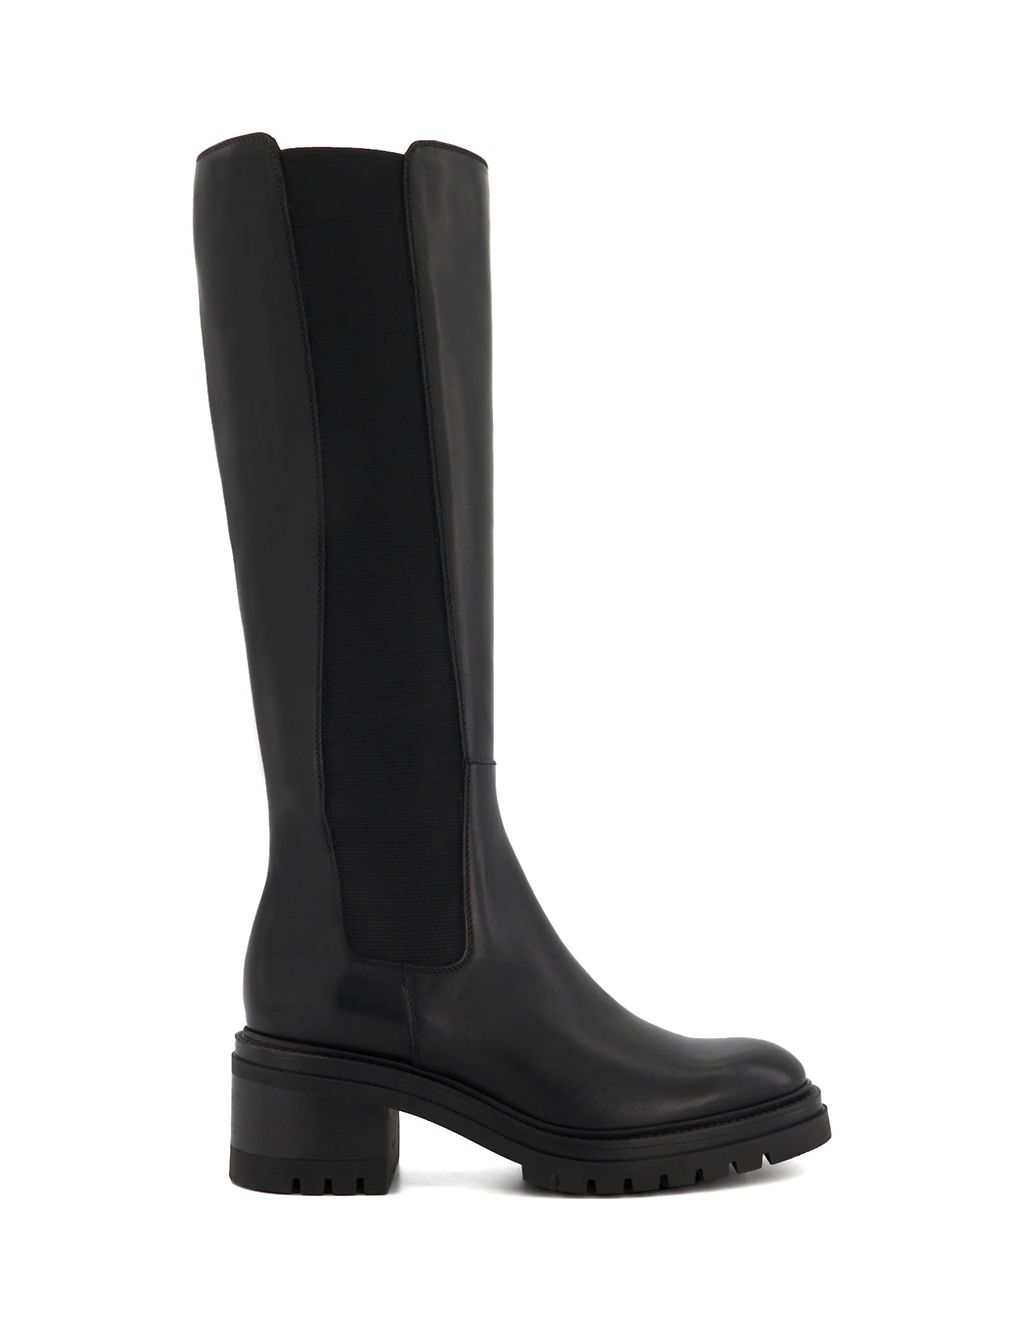 Leather Cleated Block Heel Knee High Boots | Dune London | M&S